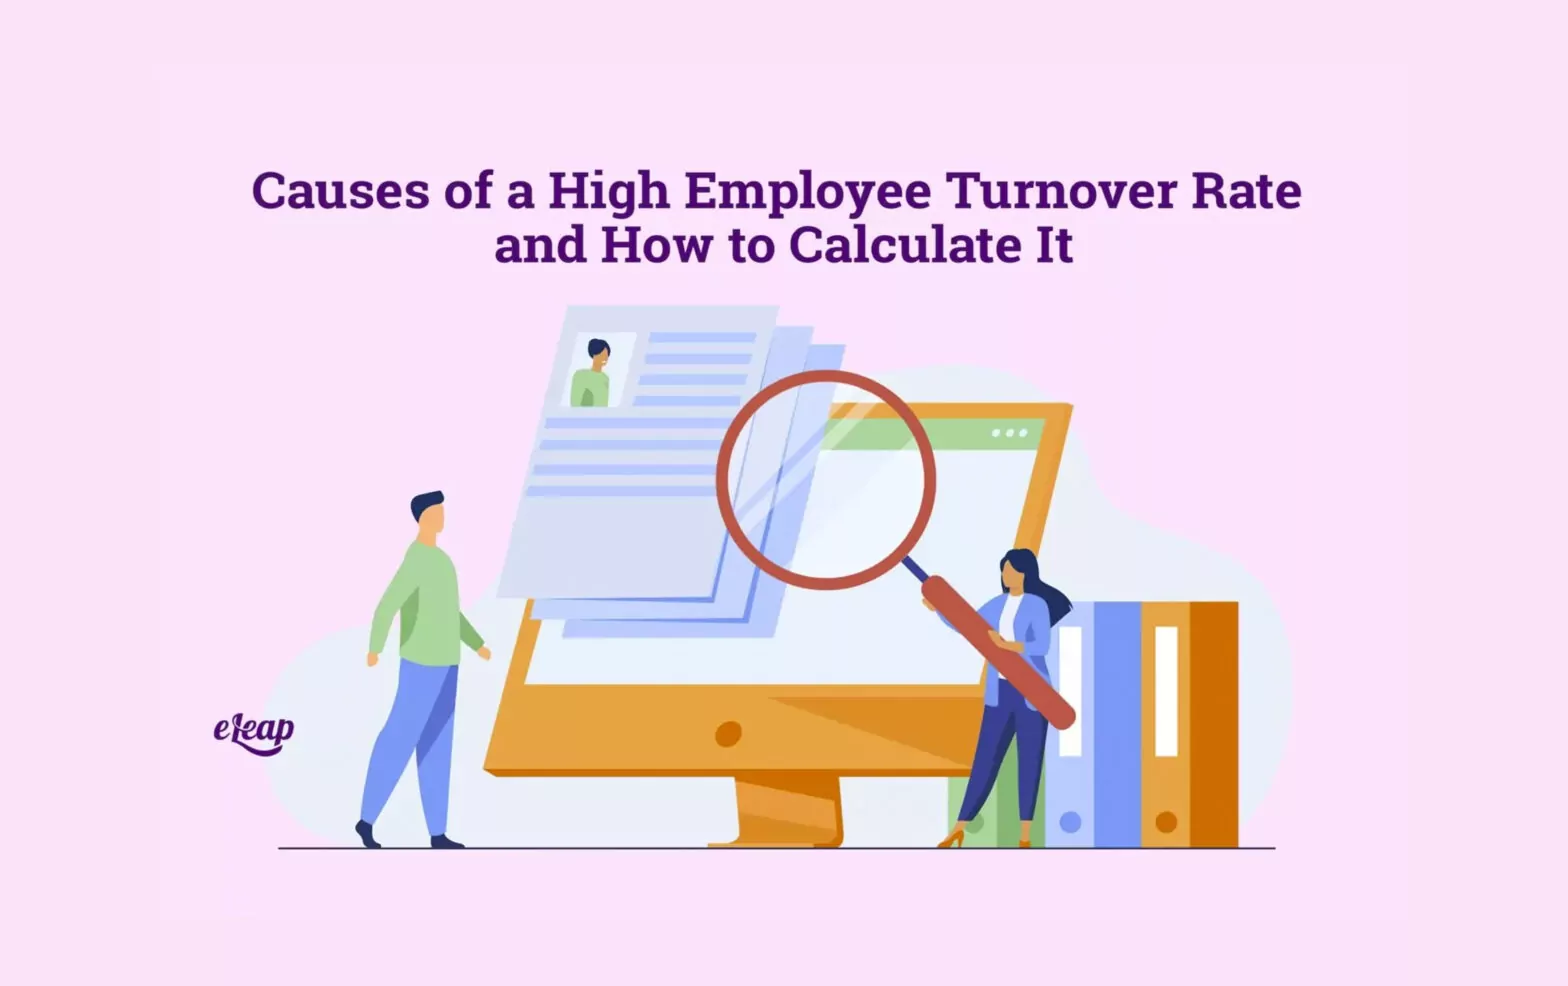 Causes of a High Employee Turnover Rate and How to Calculate It